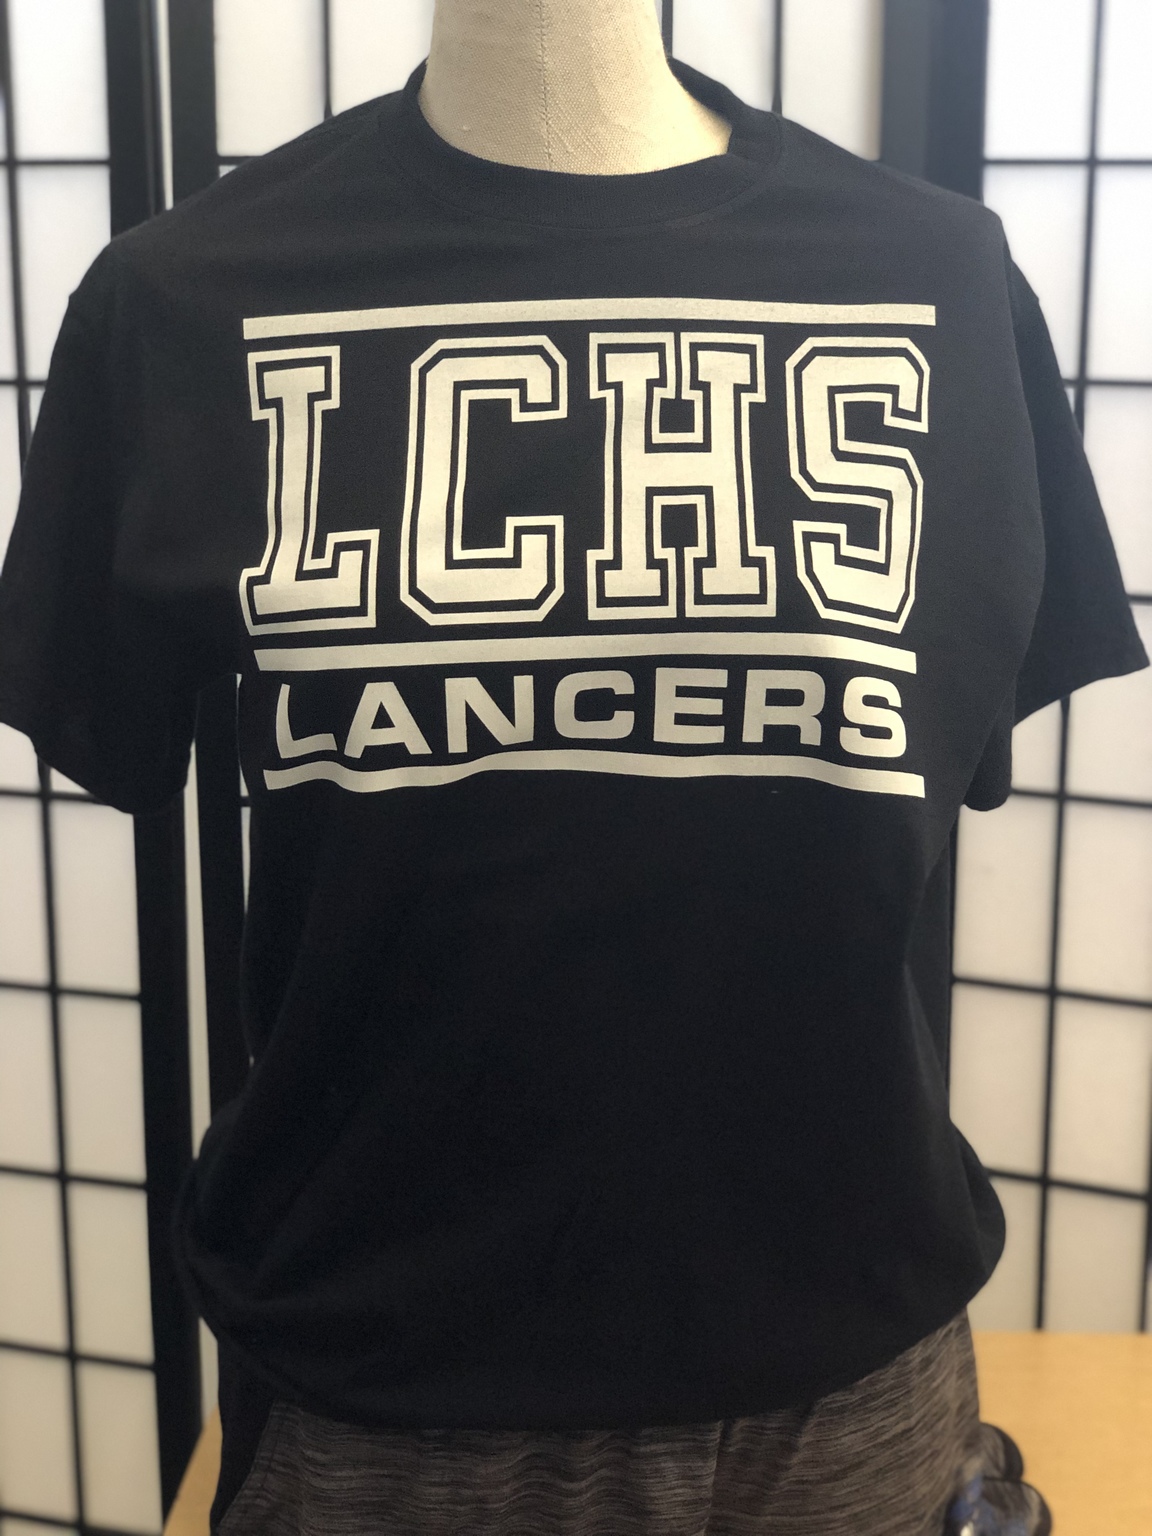 LCHS Lancers with 3 long lines, white font